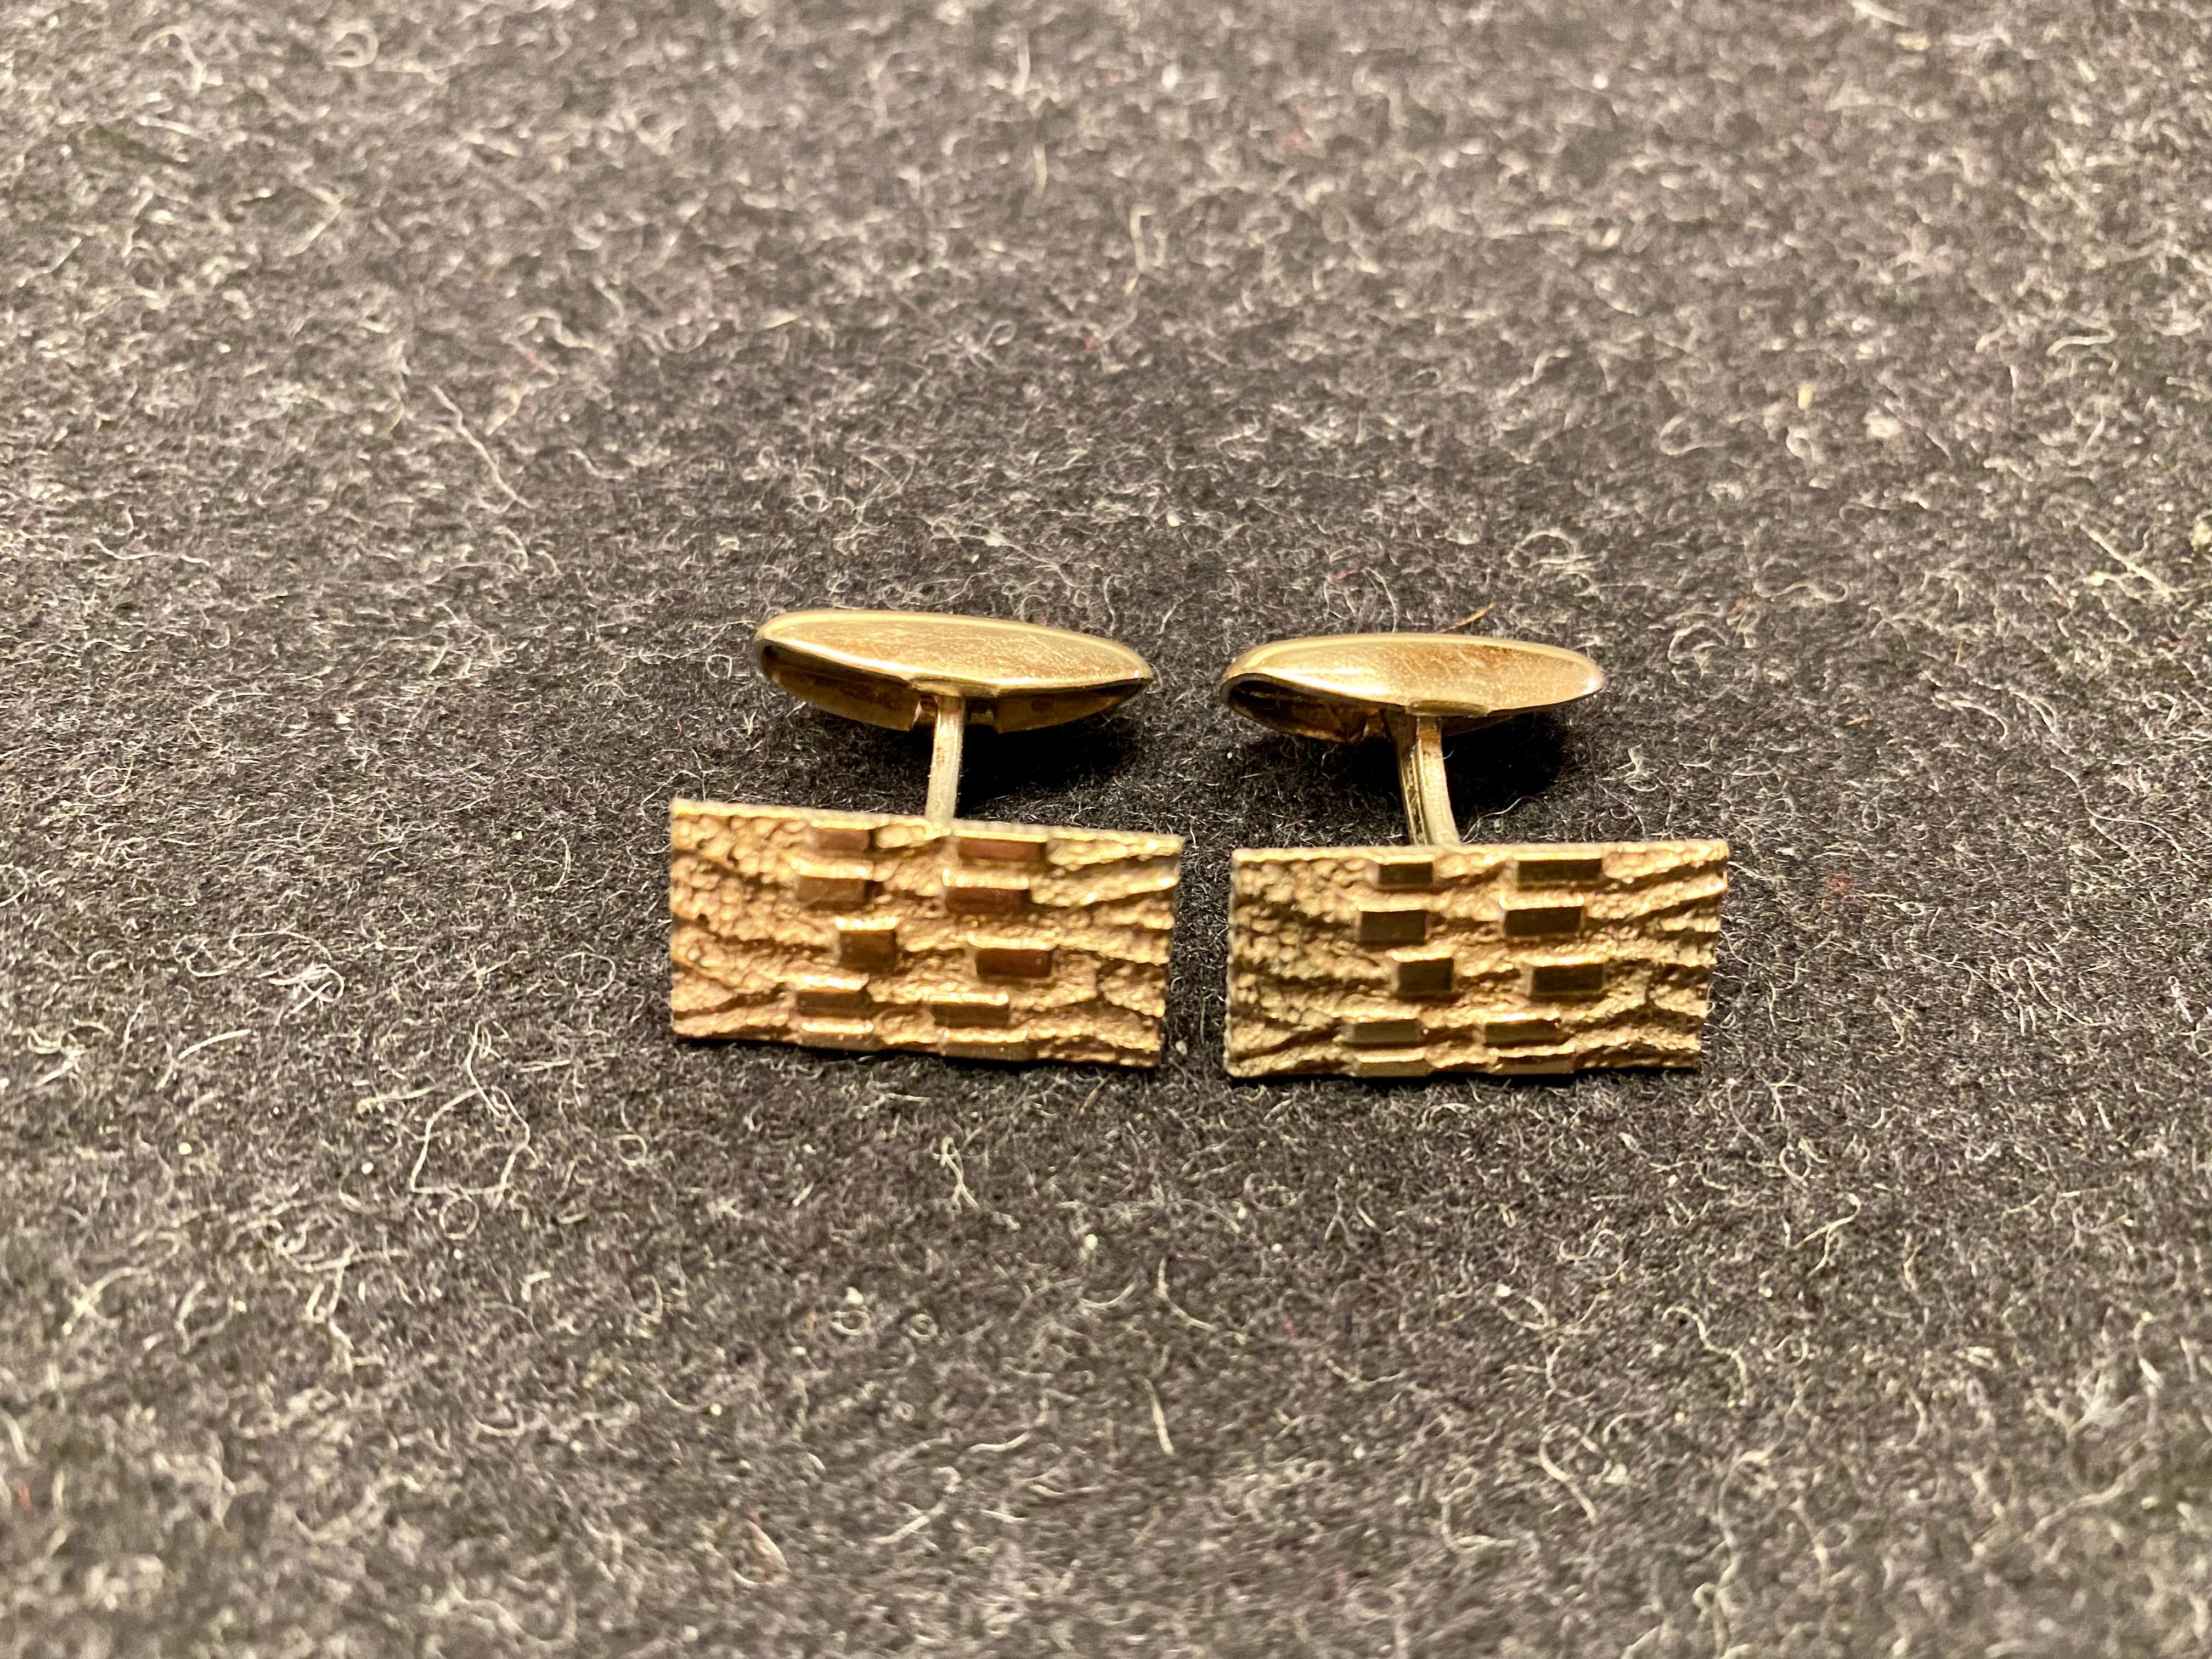 Gilt Silver Cufflinks Finland Martti Viikinniemi 
Heinola	Martti Viikinniemi	MV	1946-1974
Silver Cufflinks Finland 1970.
830 H Silver
2cm*1cm
No engravings.
Great Cufflinks
See more, we have several Cufflinks for sale.